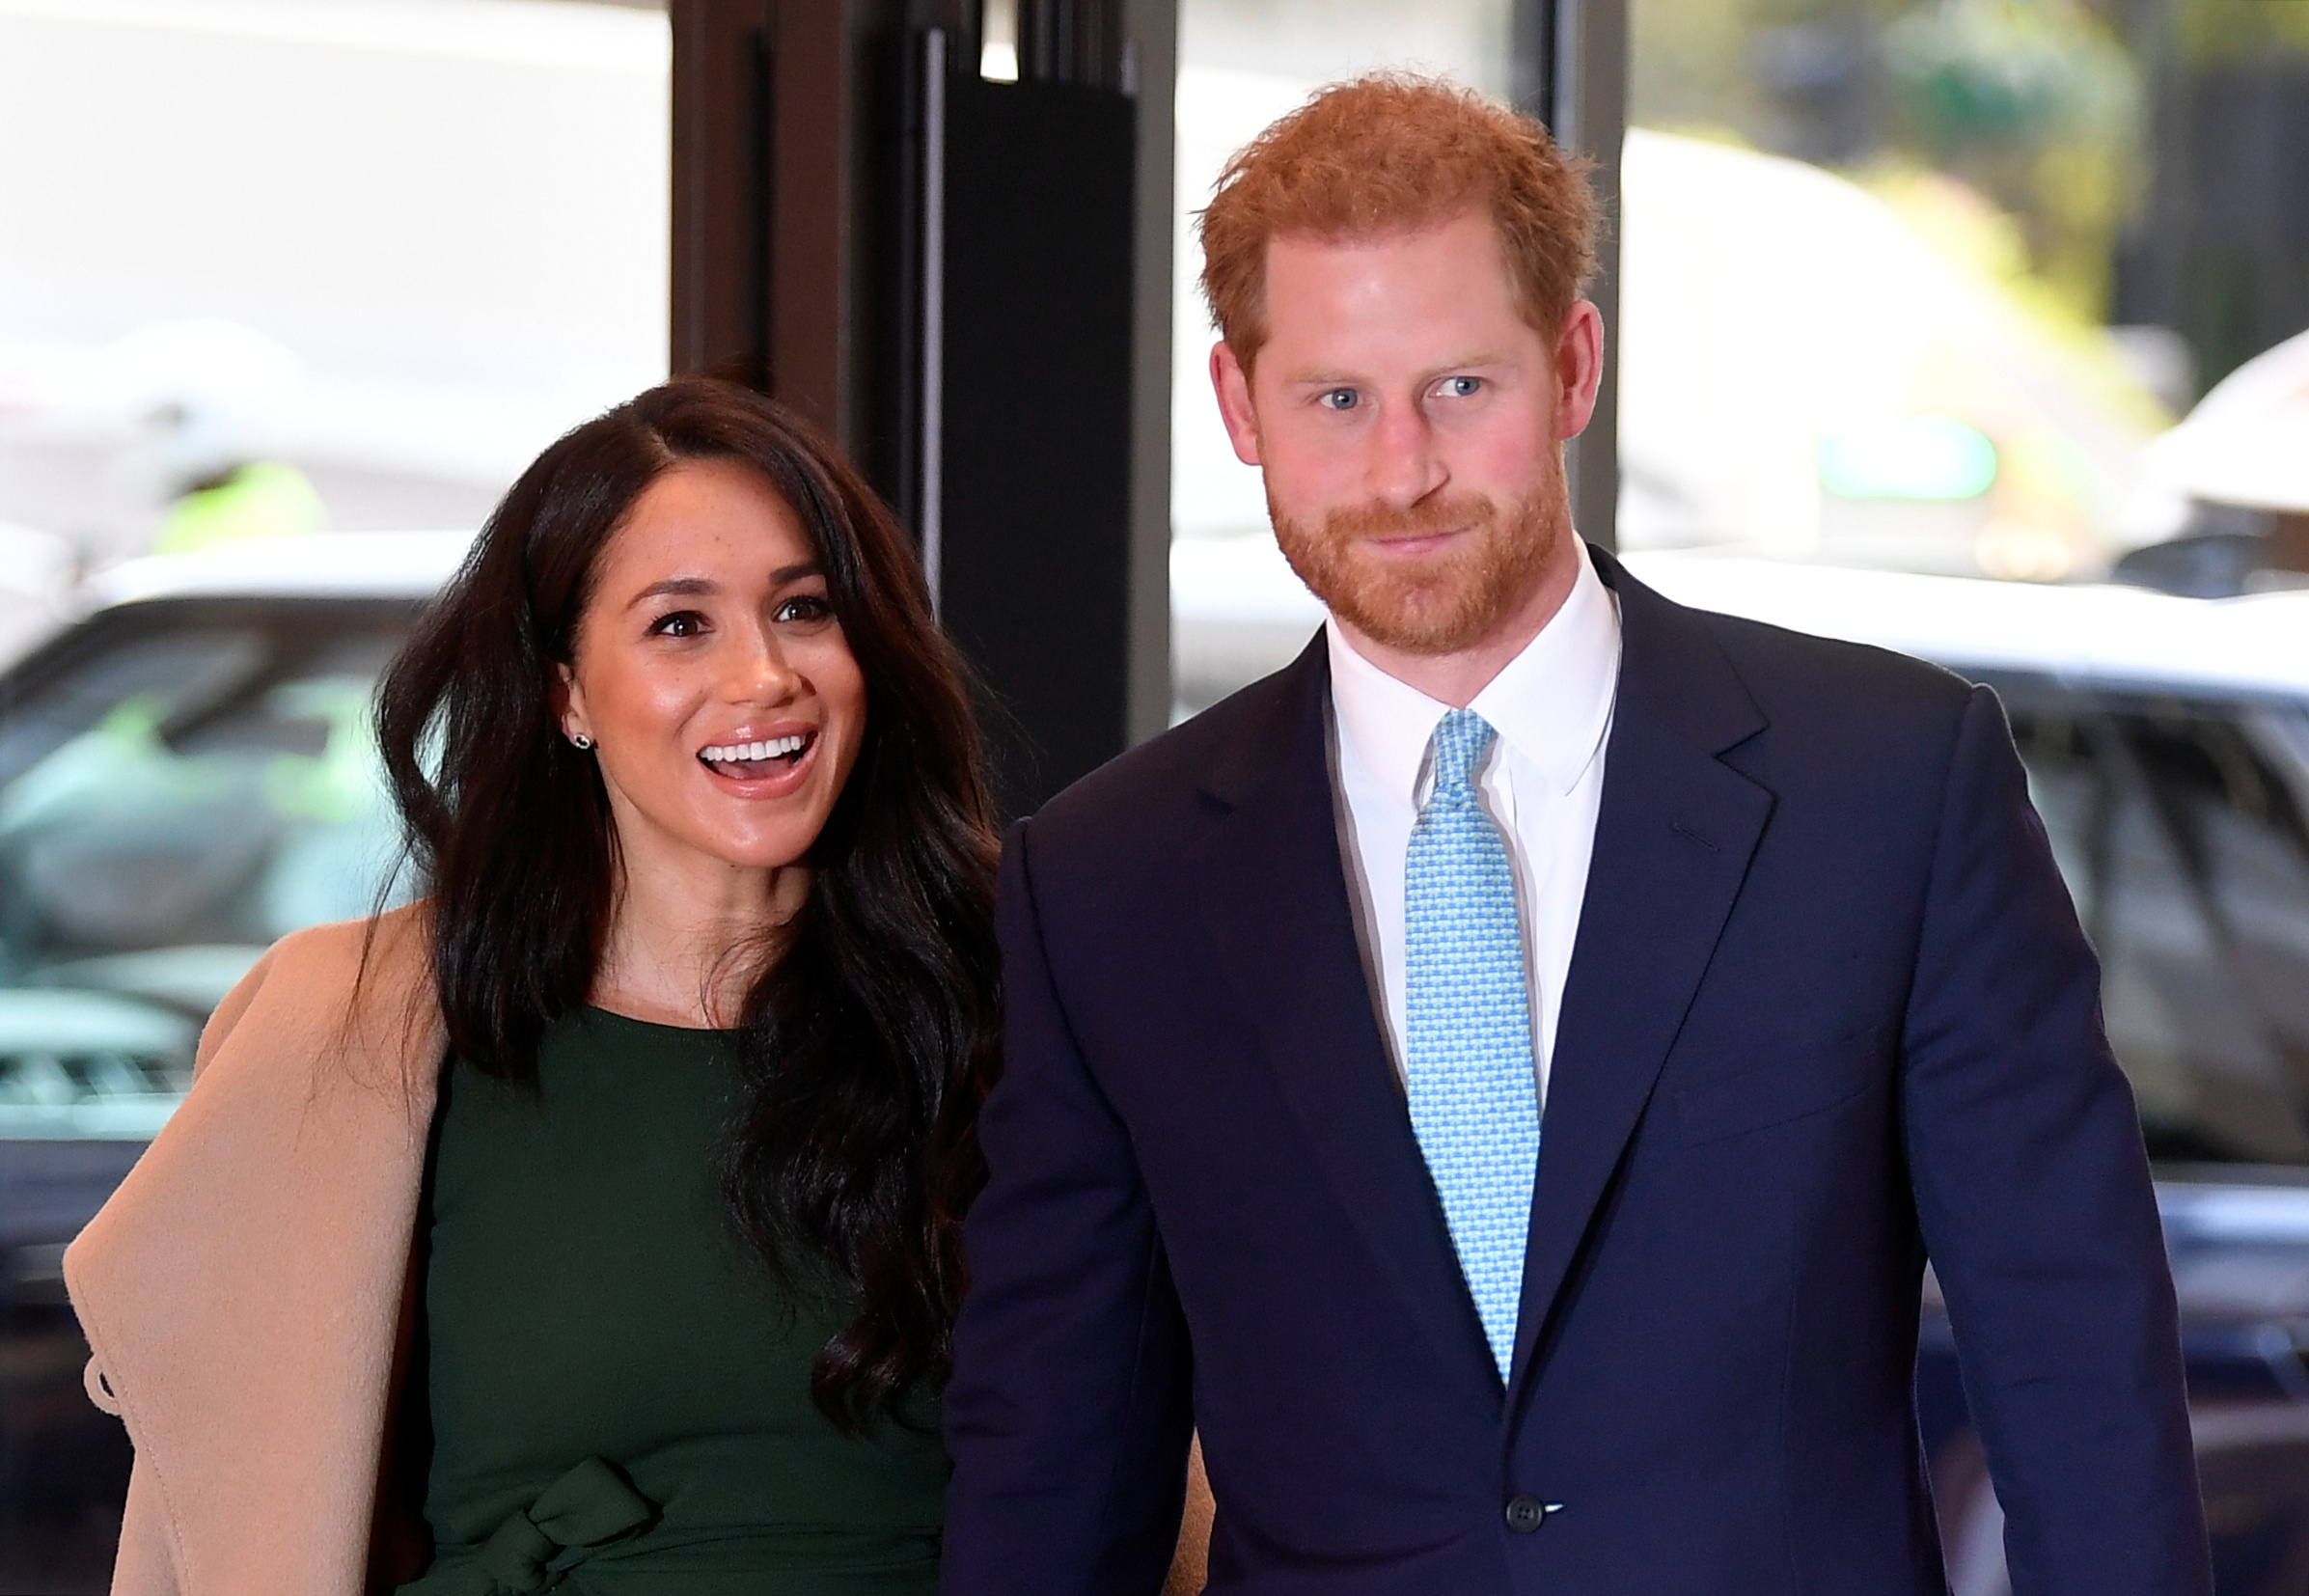 Meghan Markle and Prince Harry walk together during an event. 